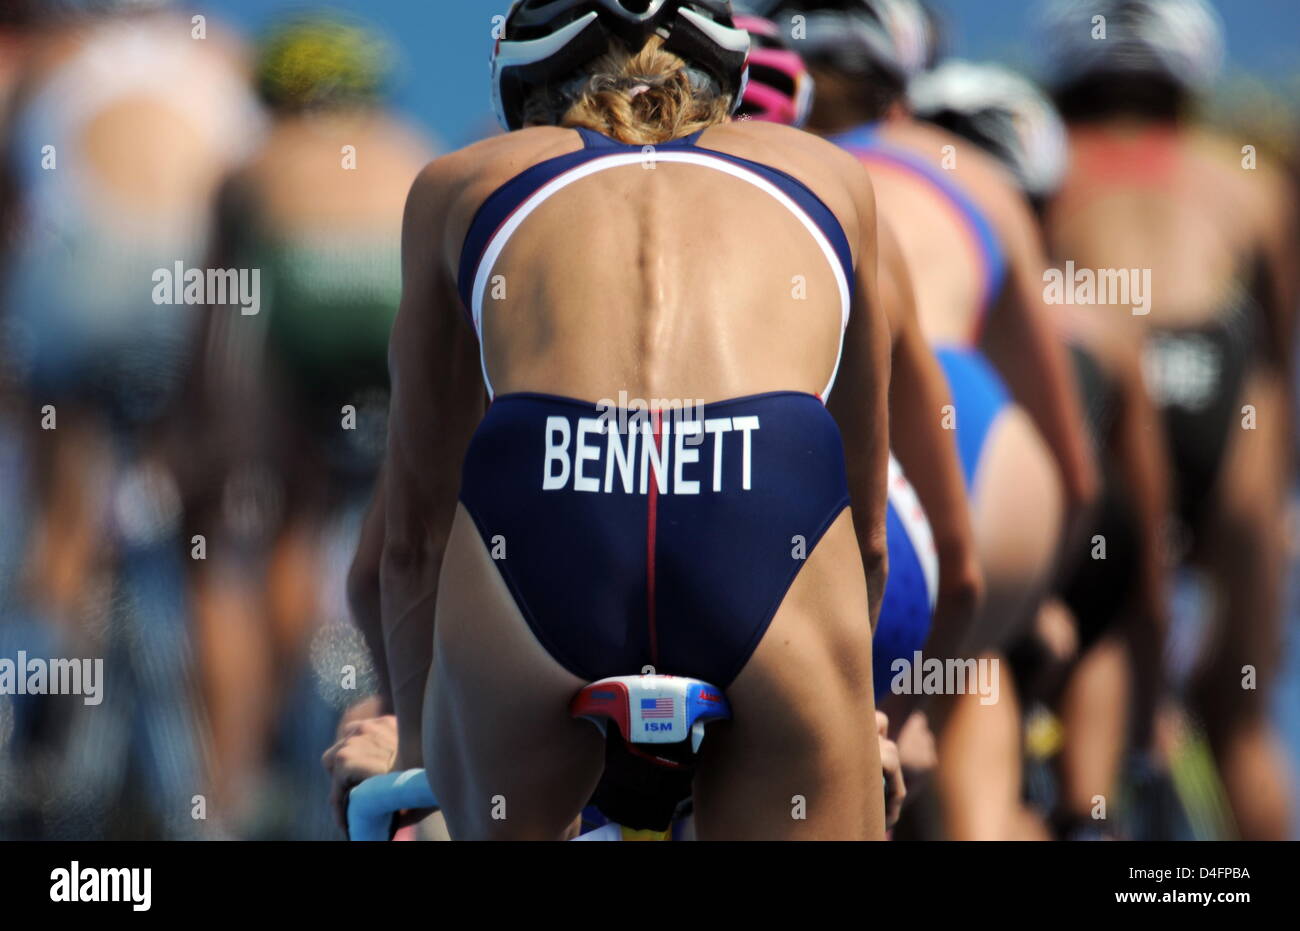 Laura Bennett of USA cycles during the women`s Triathlon final at the Ming Tomb Reservoir at the Beijing 2008 Olympic Games, Beijing, China, 18 August 2008. Pilz placed 26th. Photo: Bernd Thissen dpa (c) dpa - Bildfunk Stock Photo